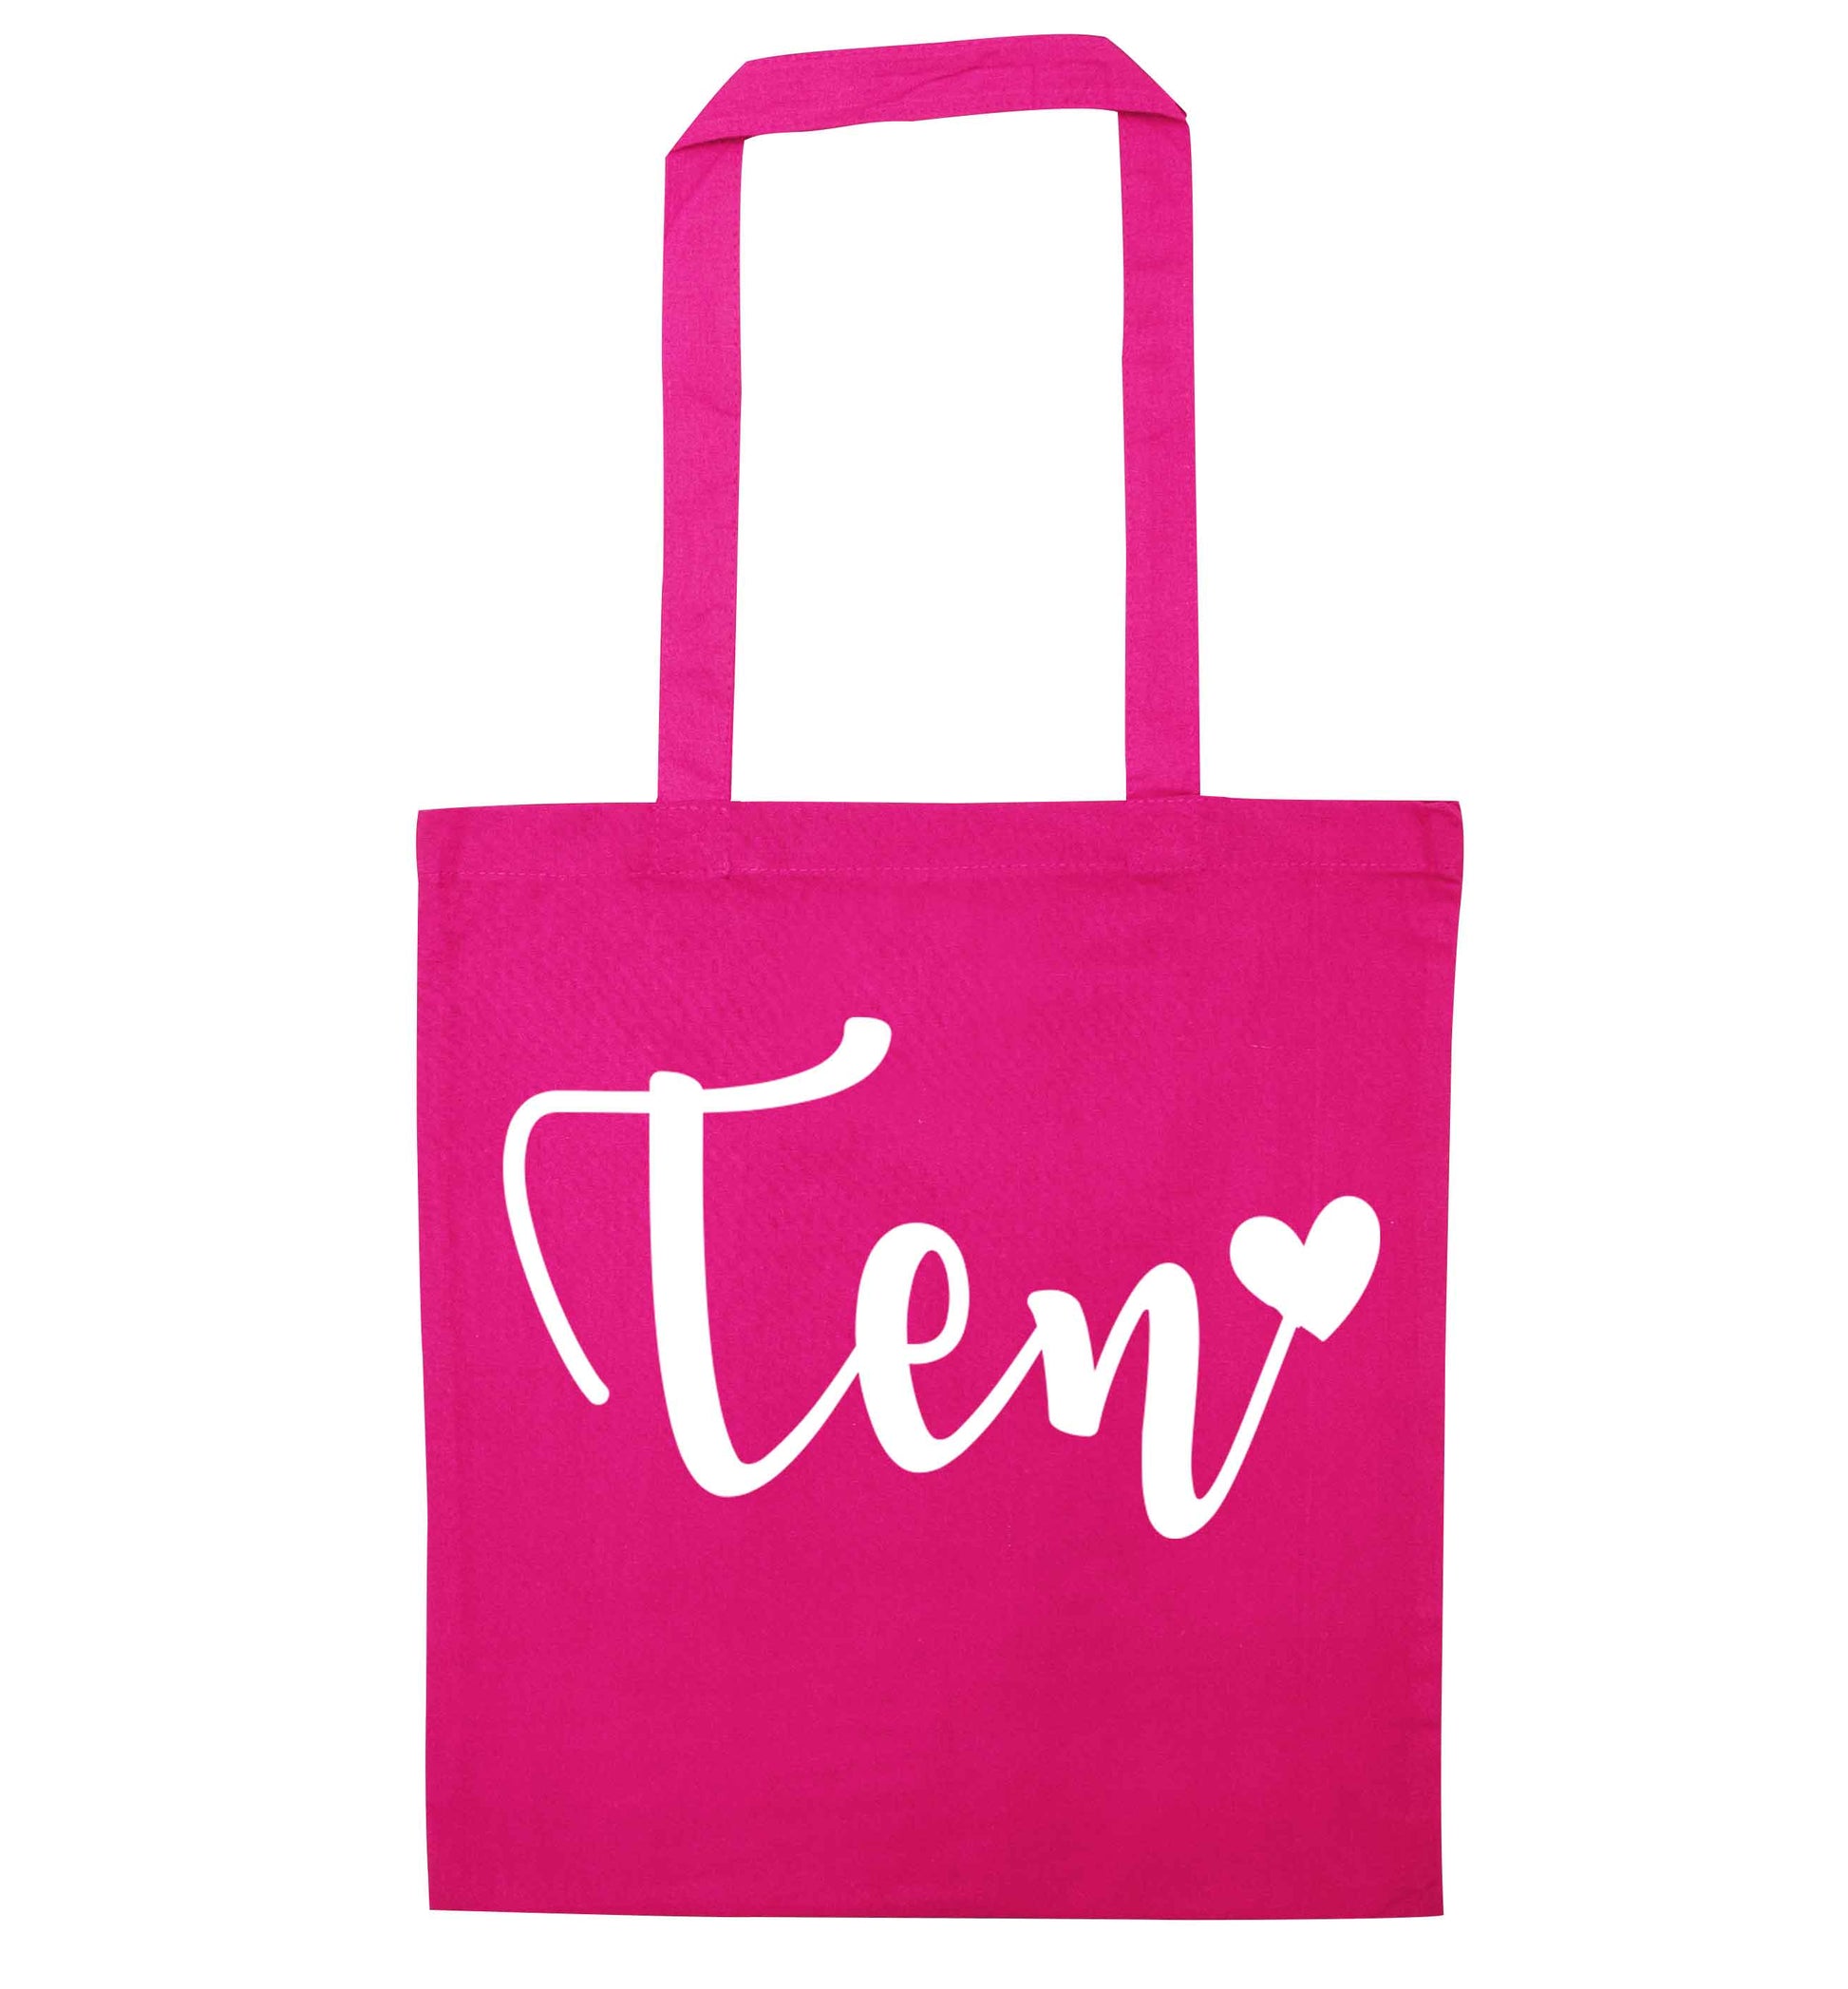 Ten and heart pink tote bag